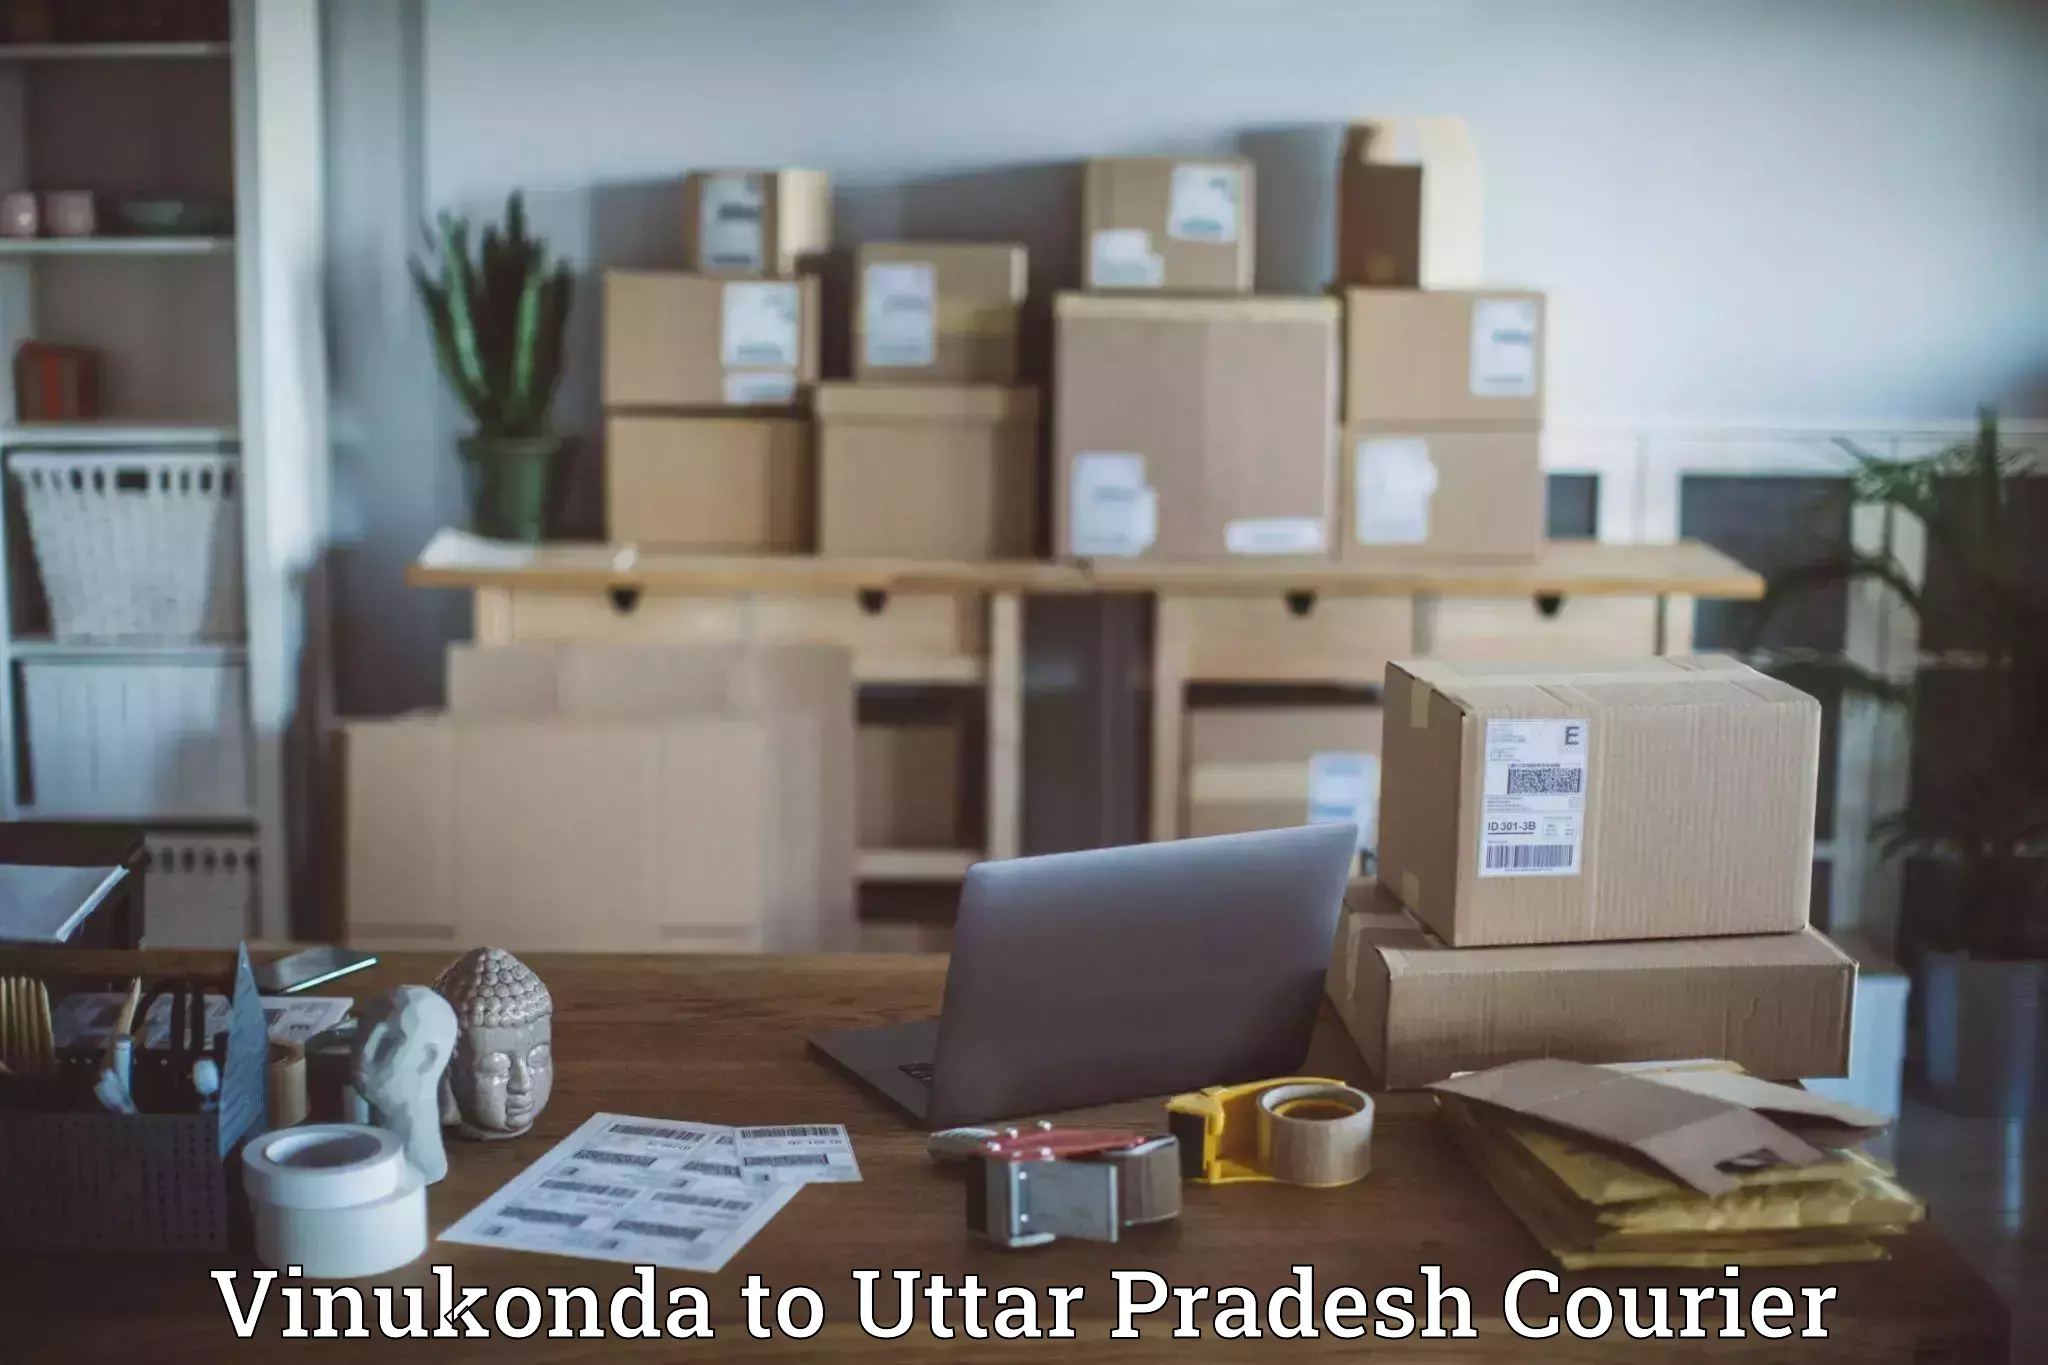 Holiday shipping services Vinukonda to Rath